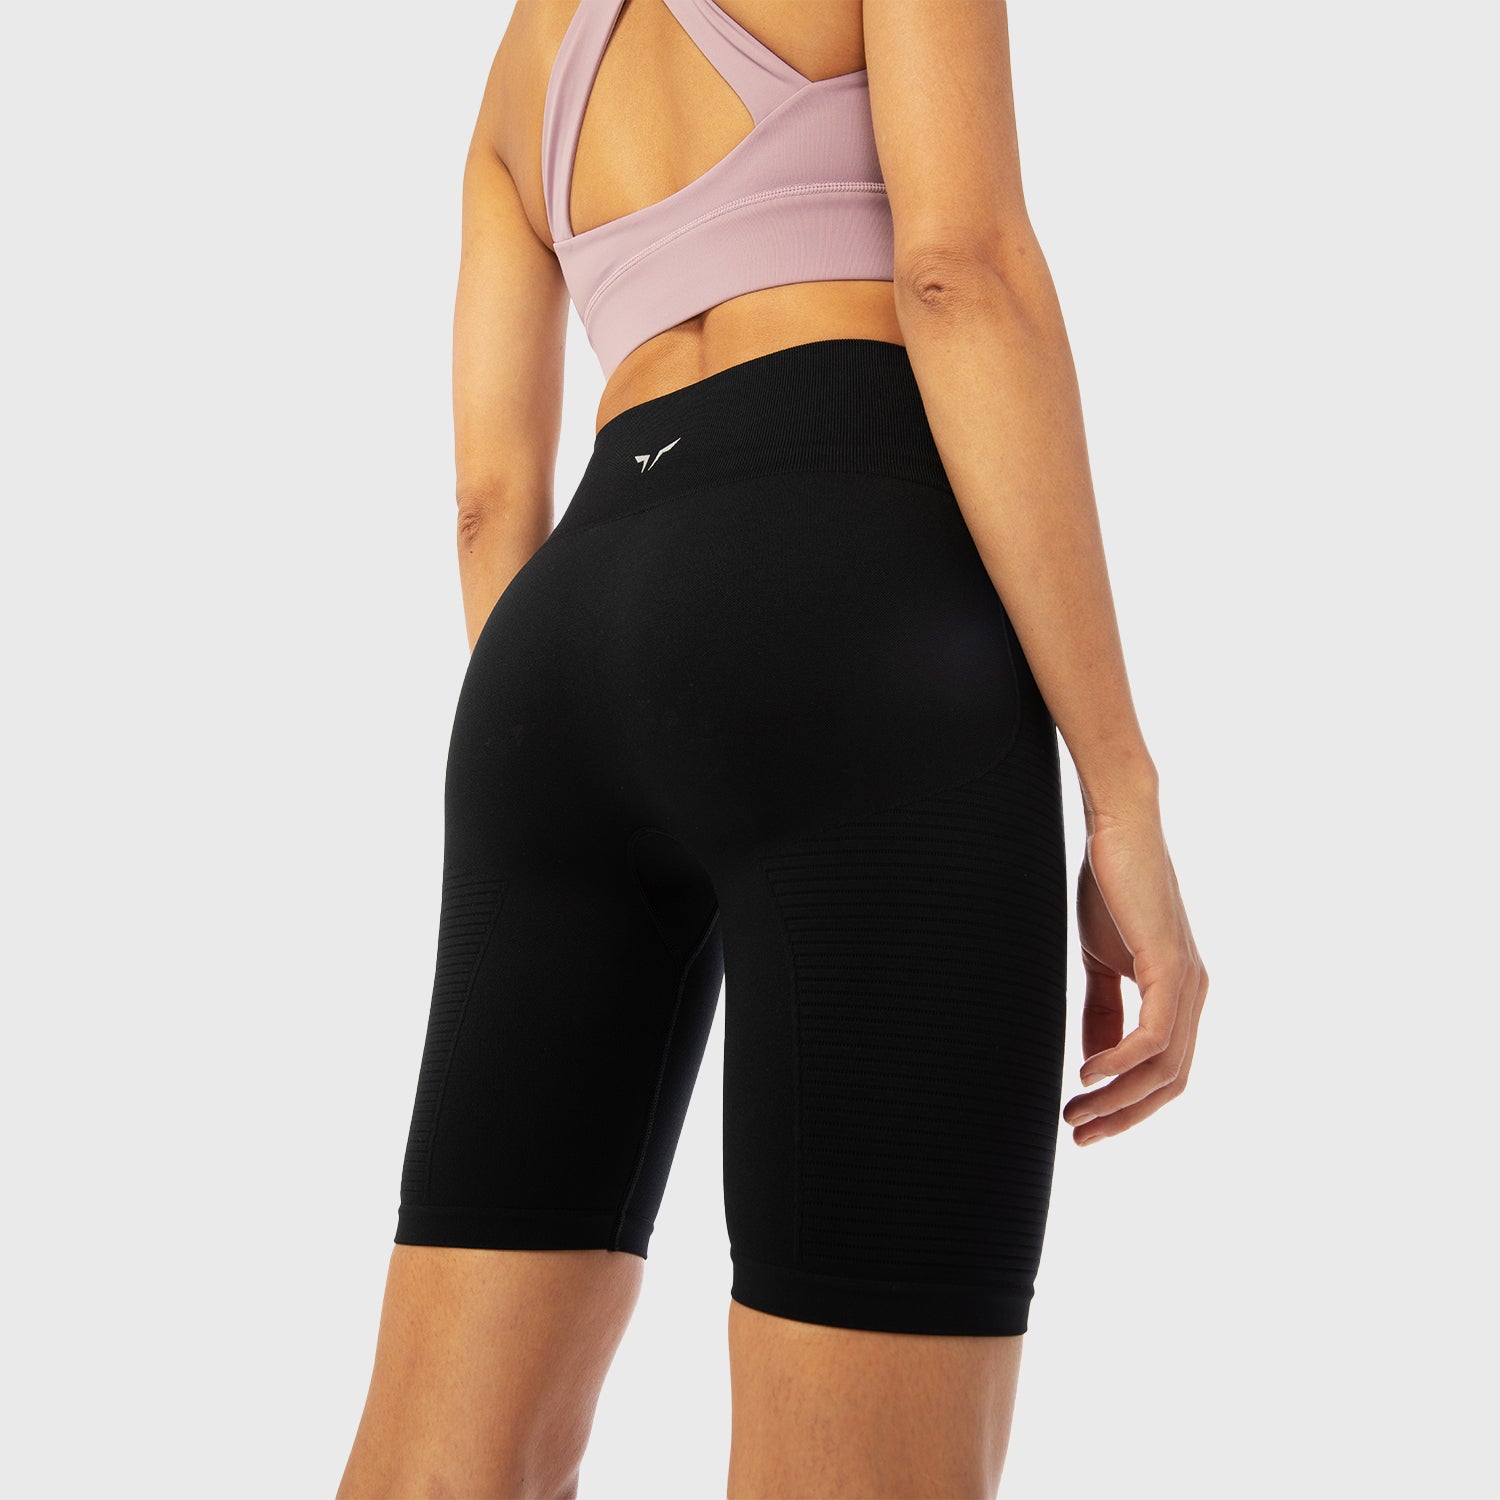 squatwolf-workout-clothes-infinity-seamless-workout-shorts-black-gym-shorts-for-women